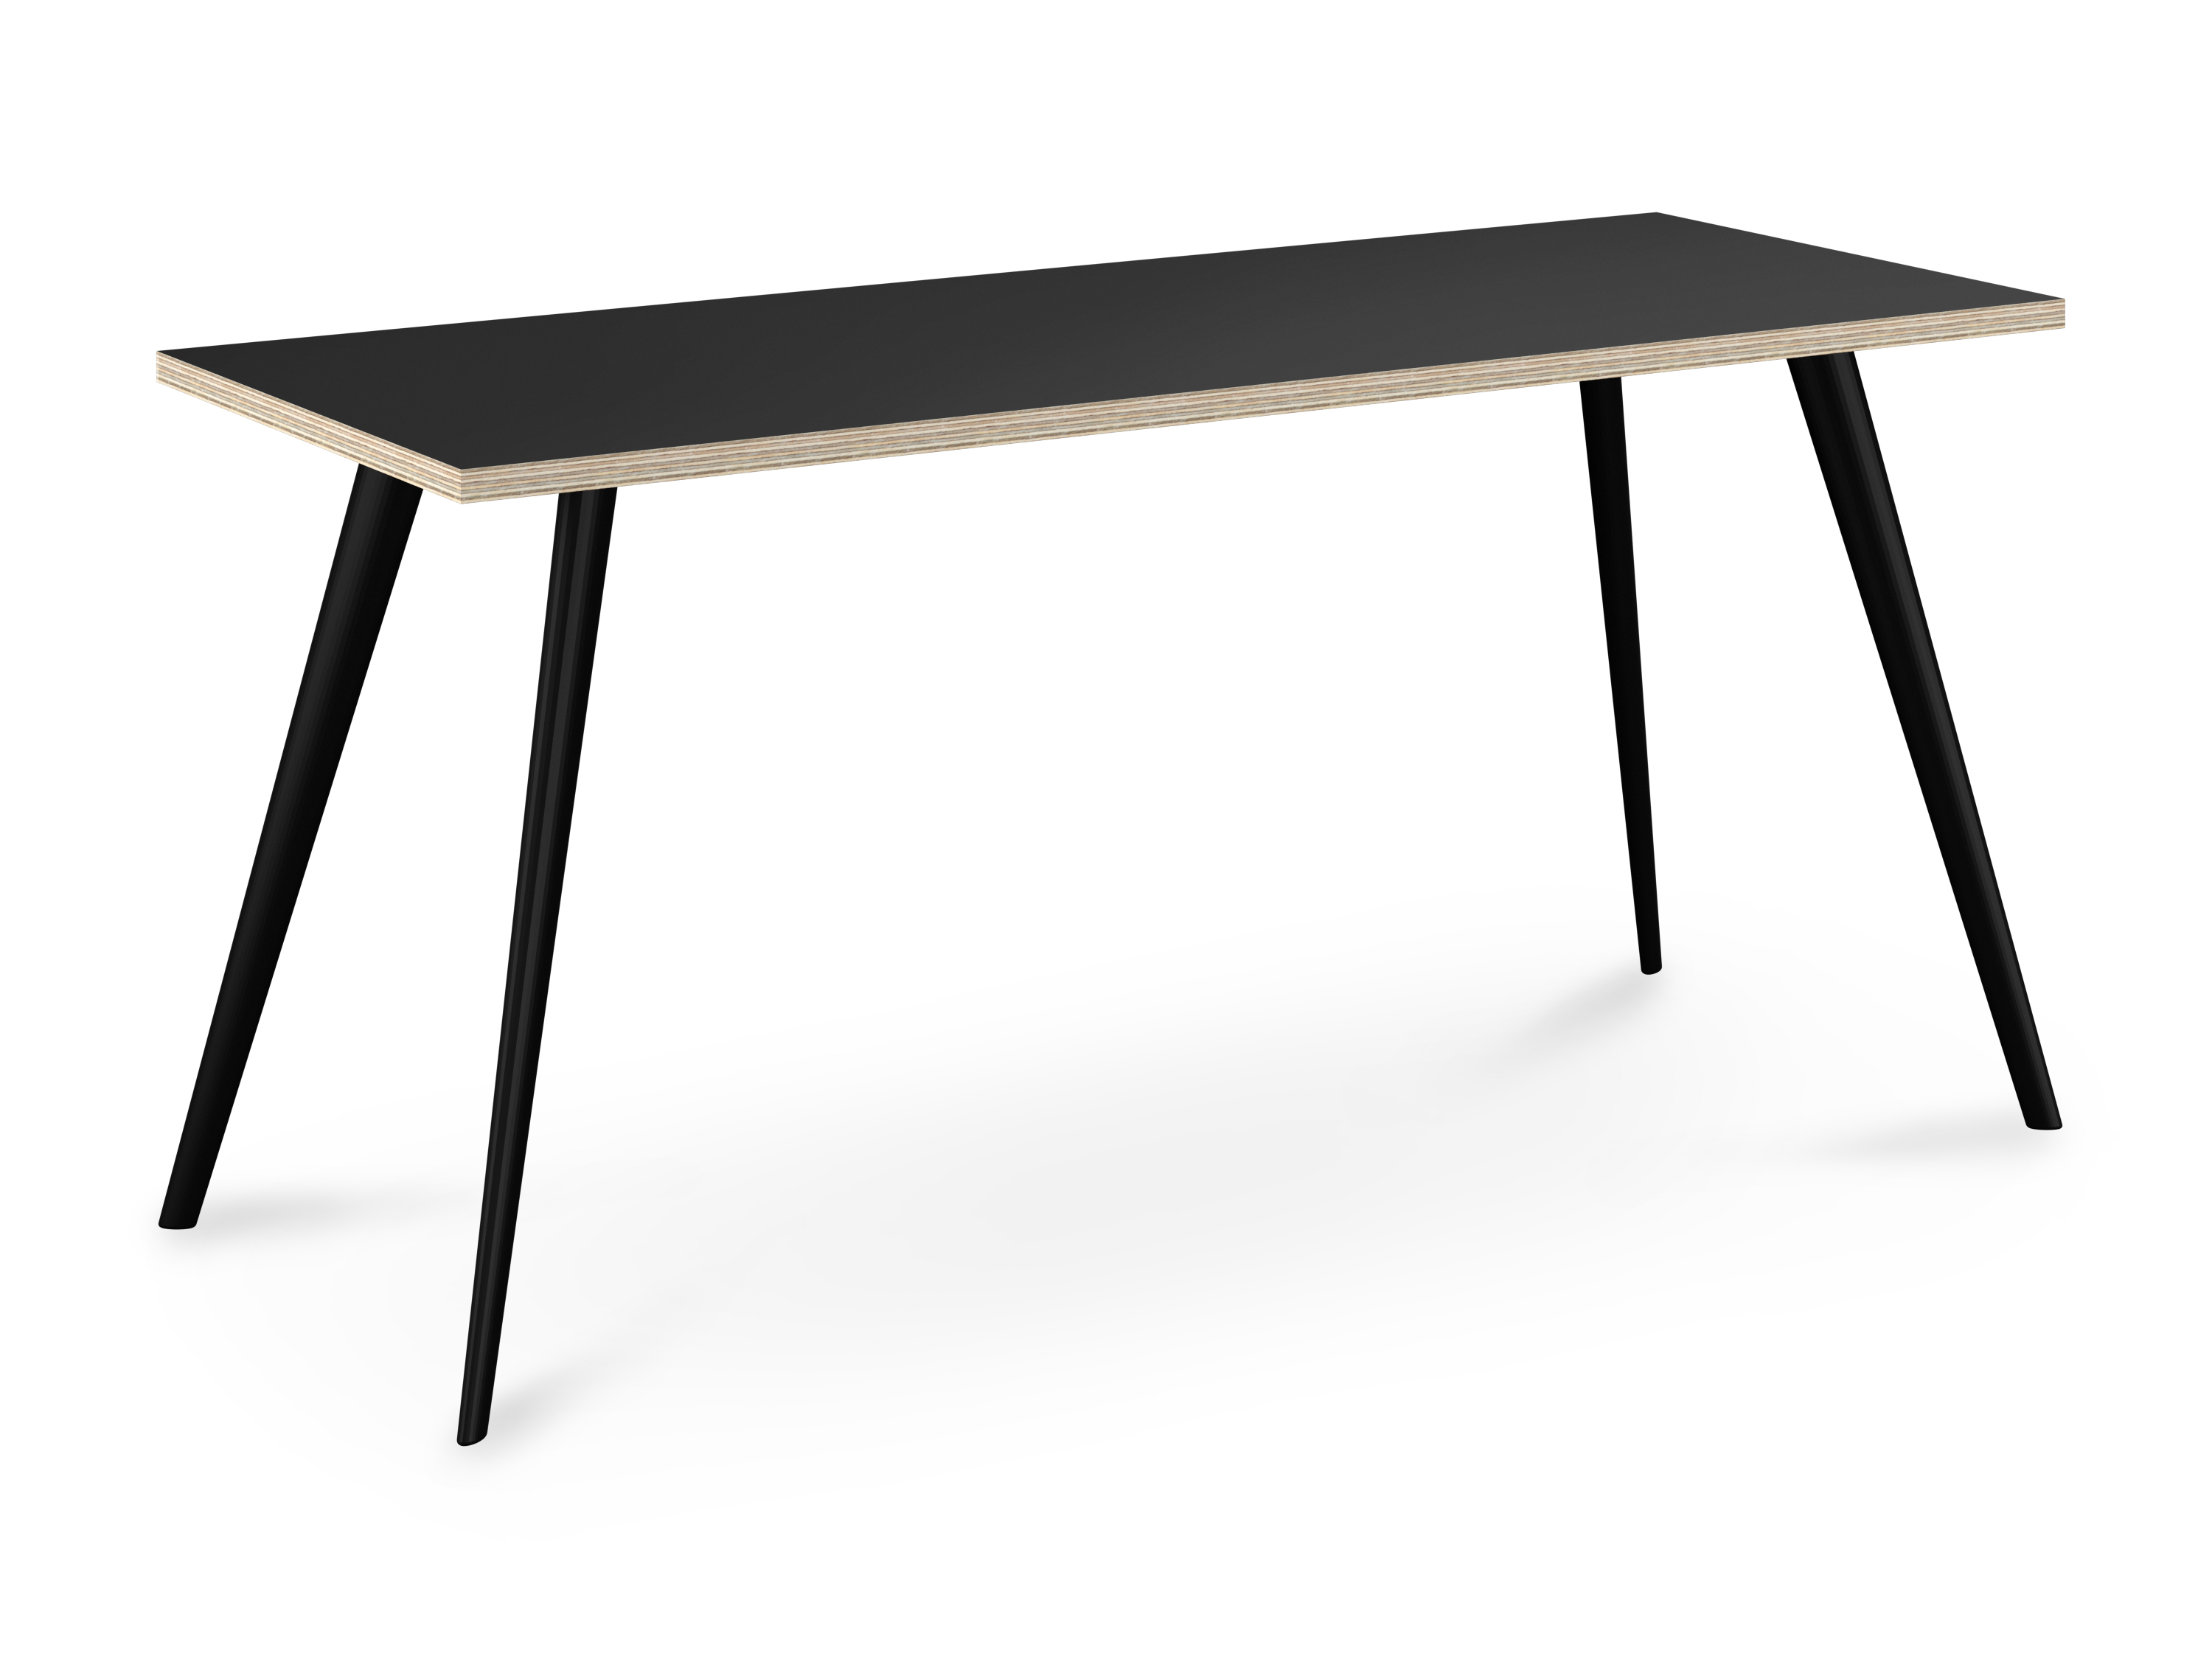 WS - Air desk - Black legs, Anthracite Acrylic Ply